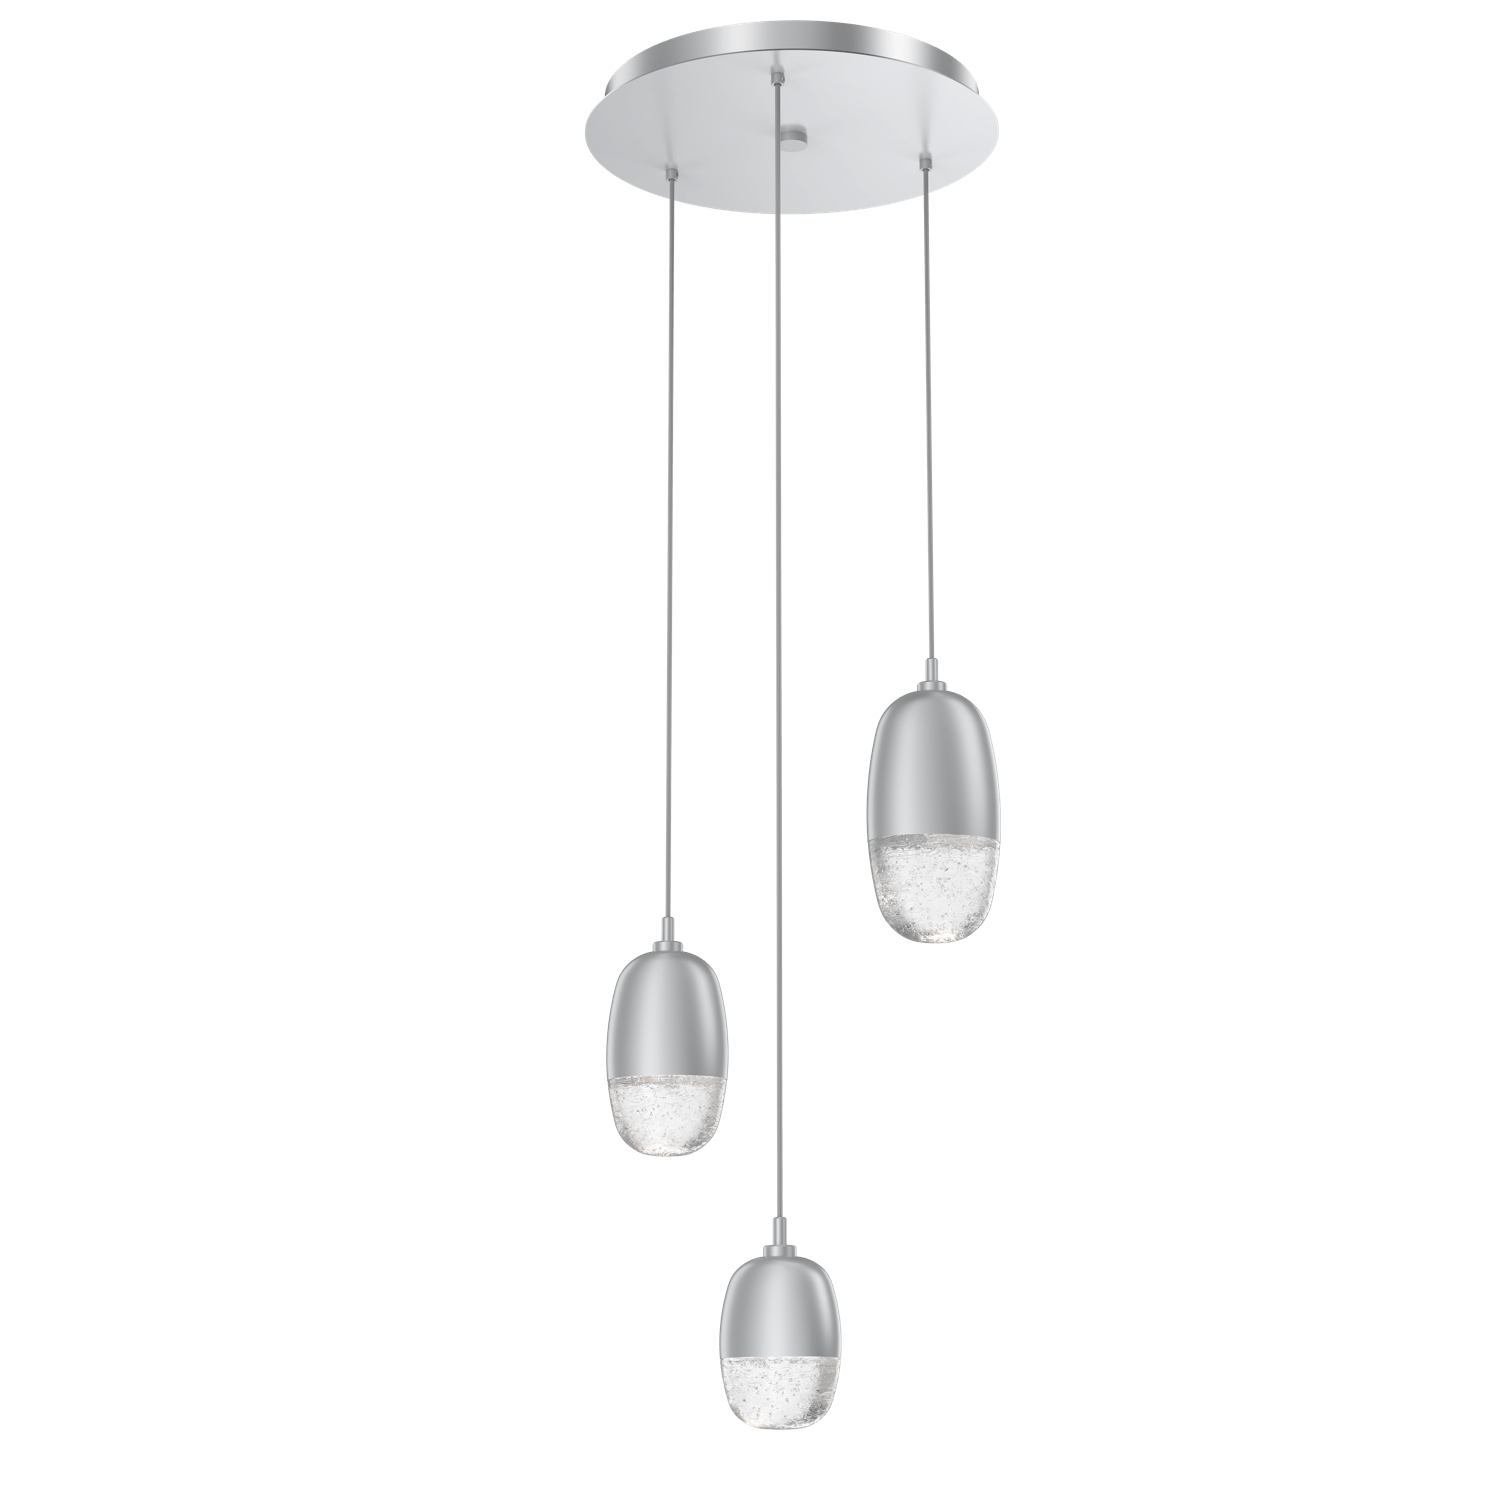 CHB0079-03-CS-Hammerton-Studio-Pebble-3-light-round-pendant-chandelier-with-classic-silver-finish-and-clear-cast-glass-shades-and-LED-lamping